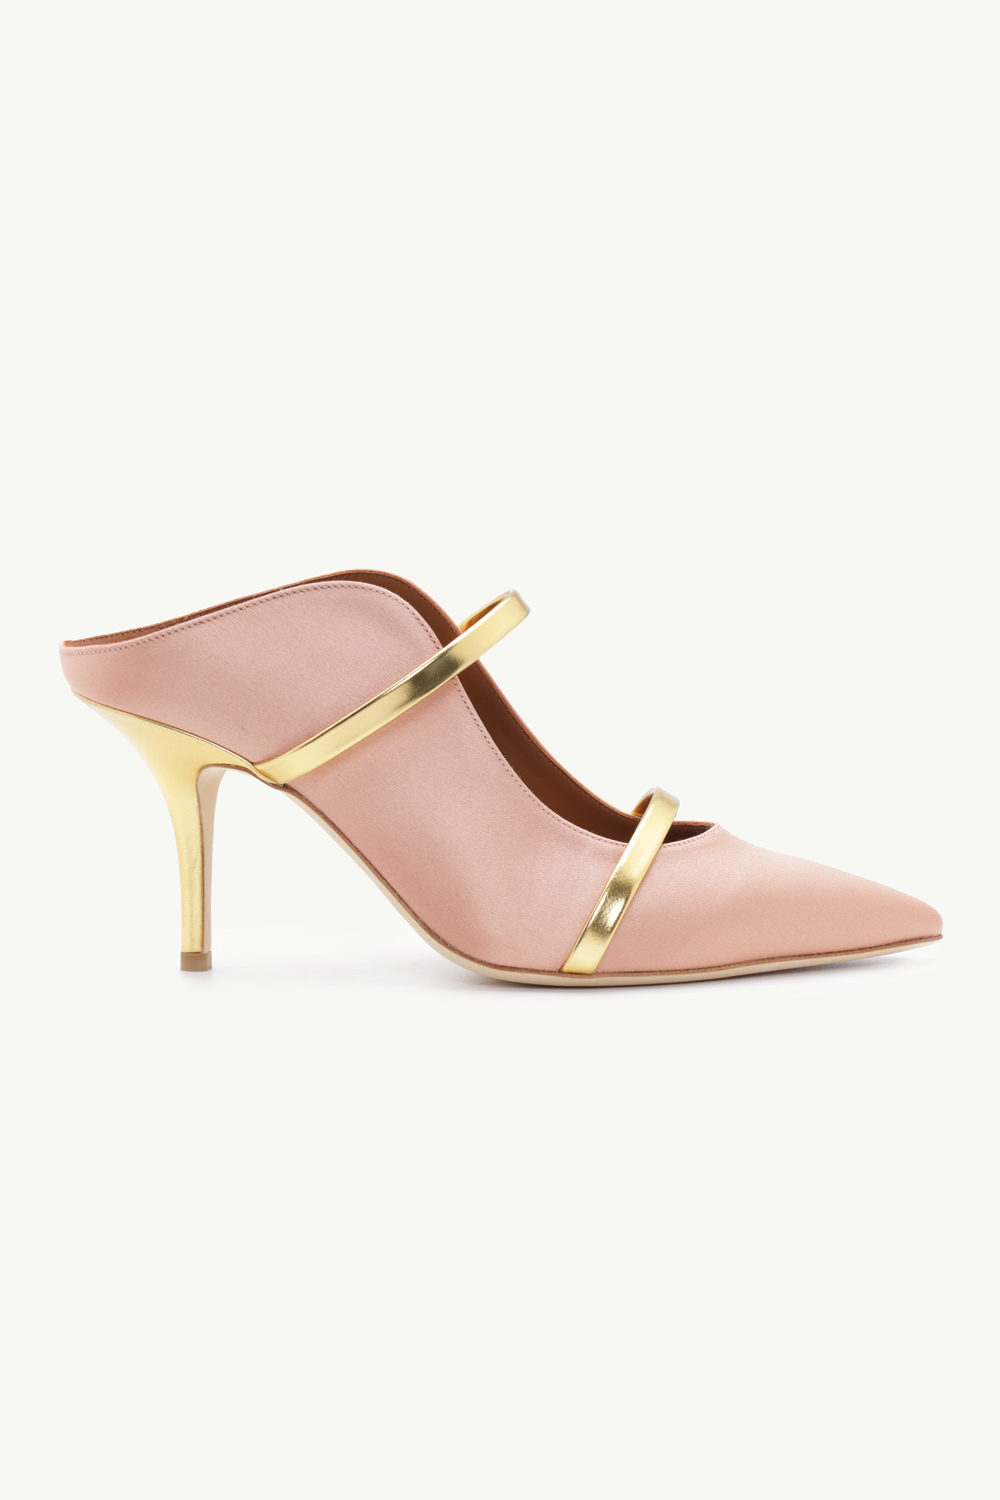 MALONE SOULIERS Maureen Pumps 70mm in Blush Satin/Gold 0